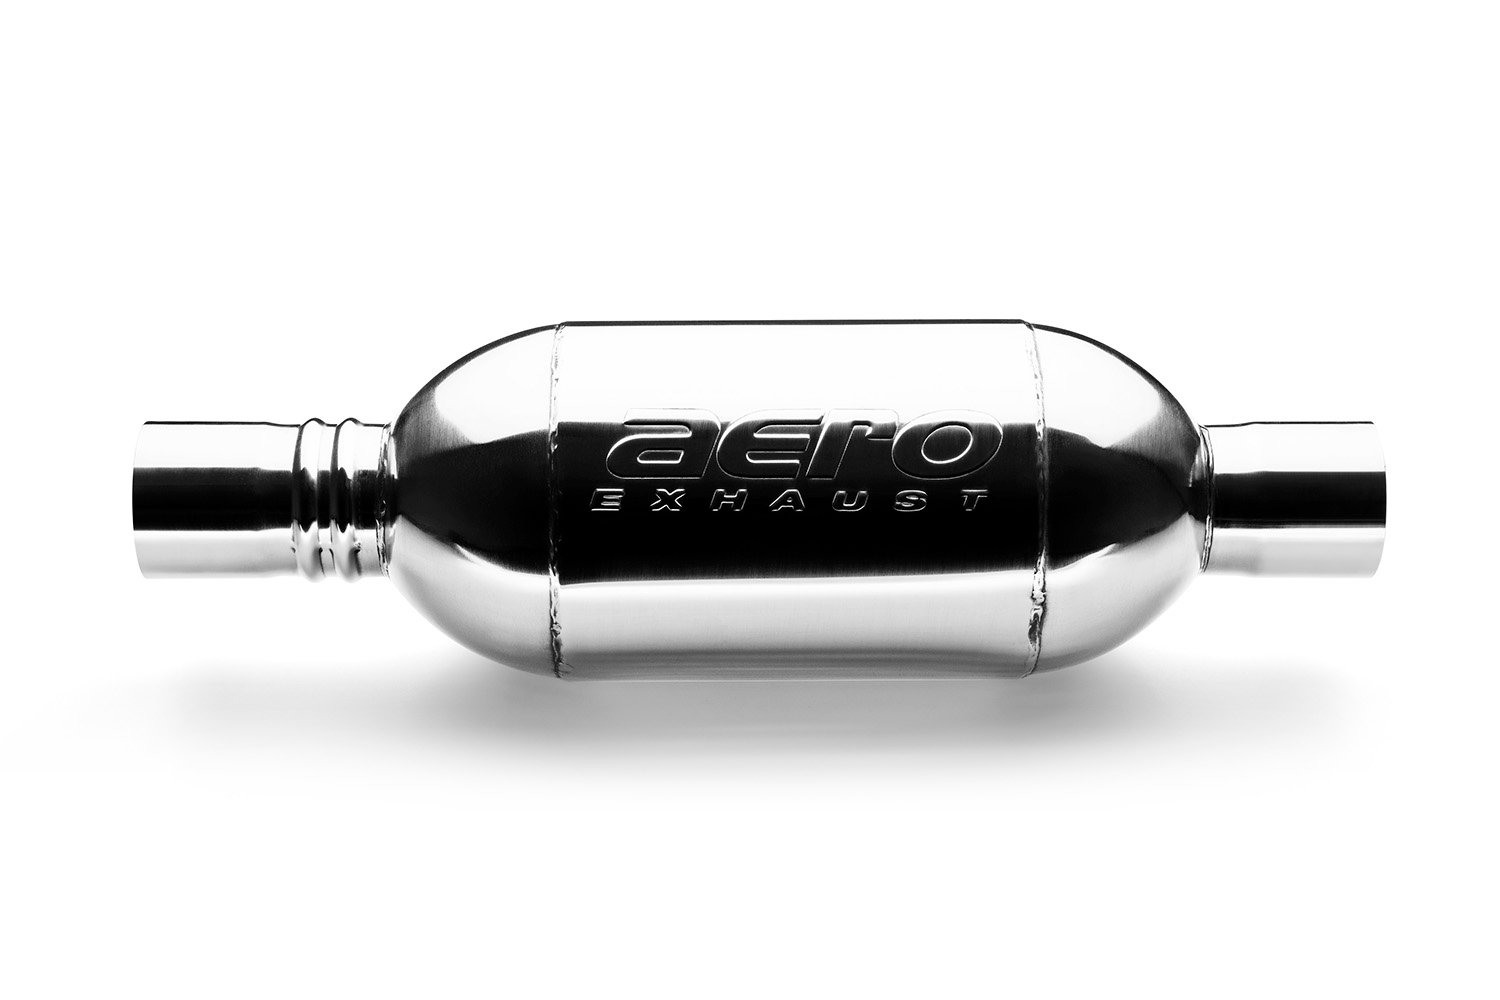 Turbine Performance Muffler, Inlet/Outlet: 2.500 in., Overall Length: 20 in. [Mirror Polished Finish]